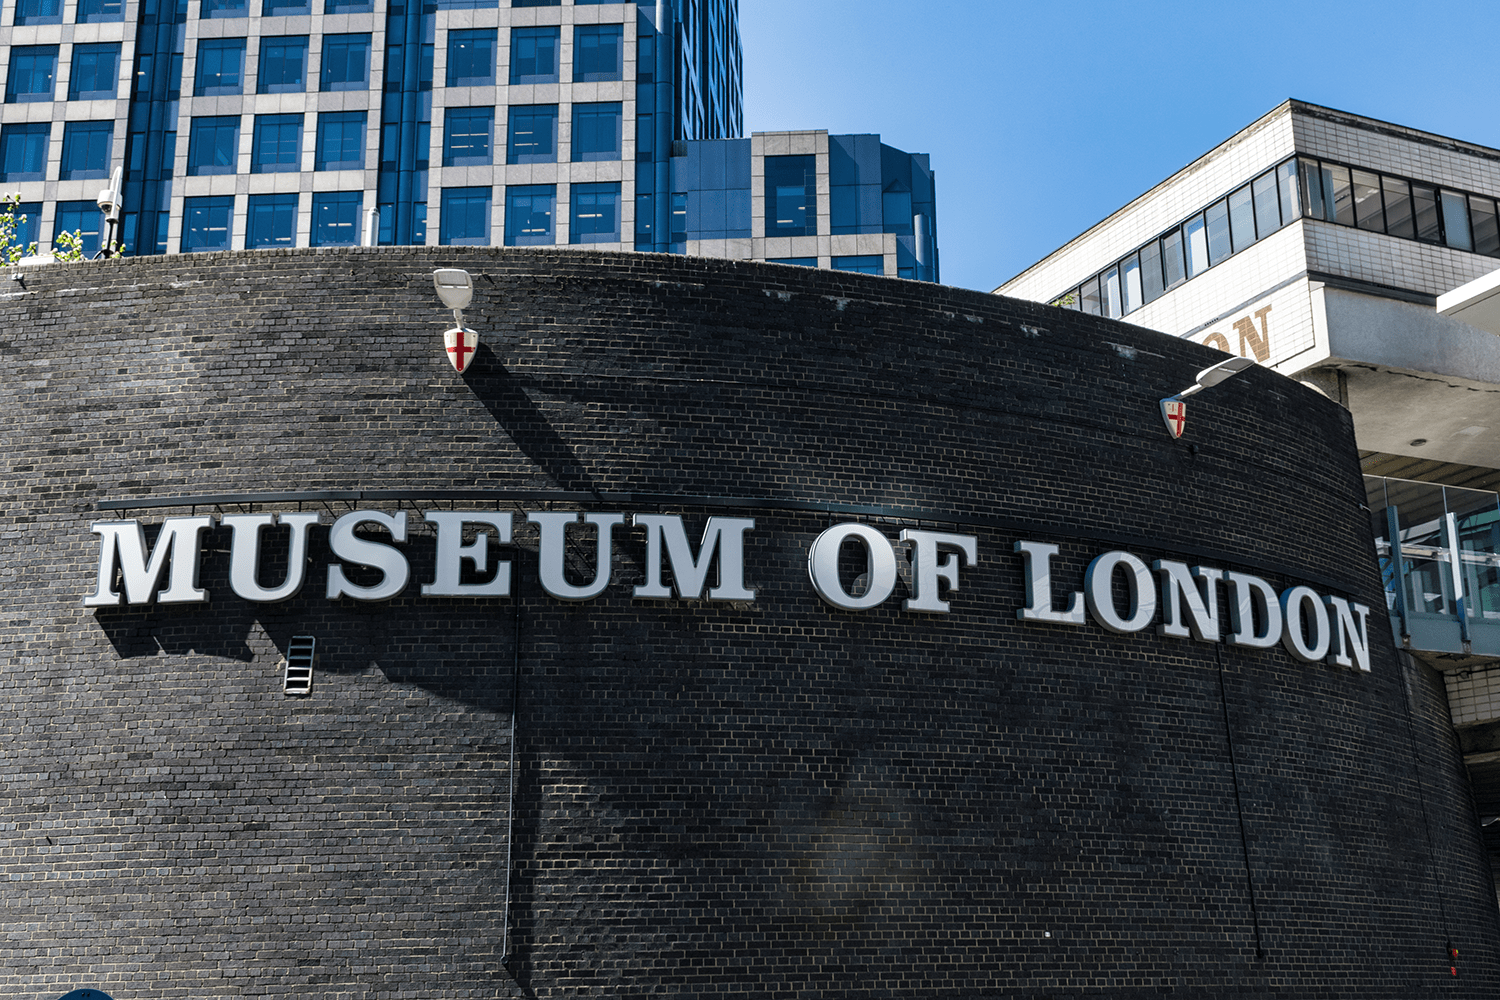 Museum of London Site Should be Retrofitted not Demolished says Heritage Group